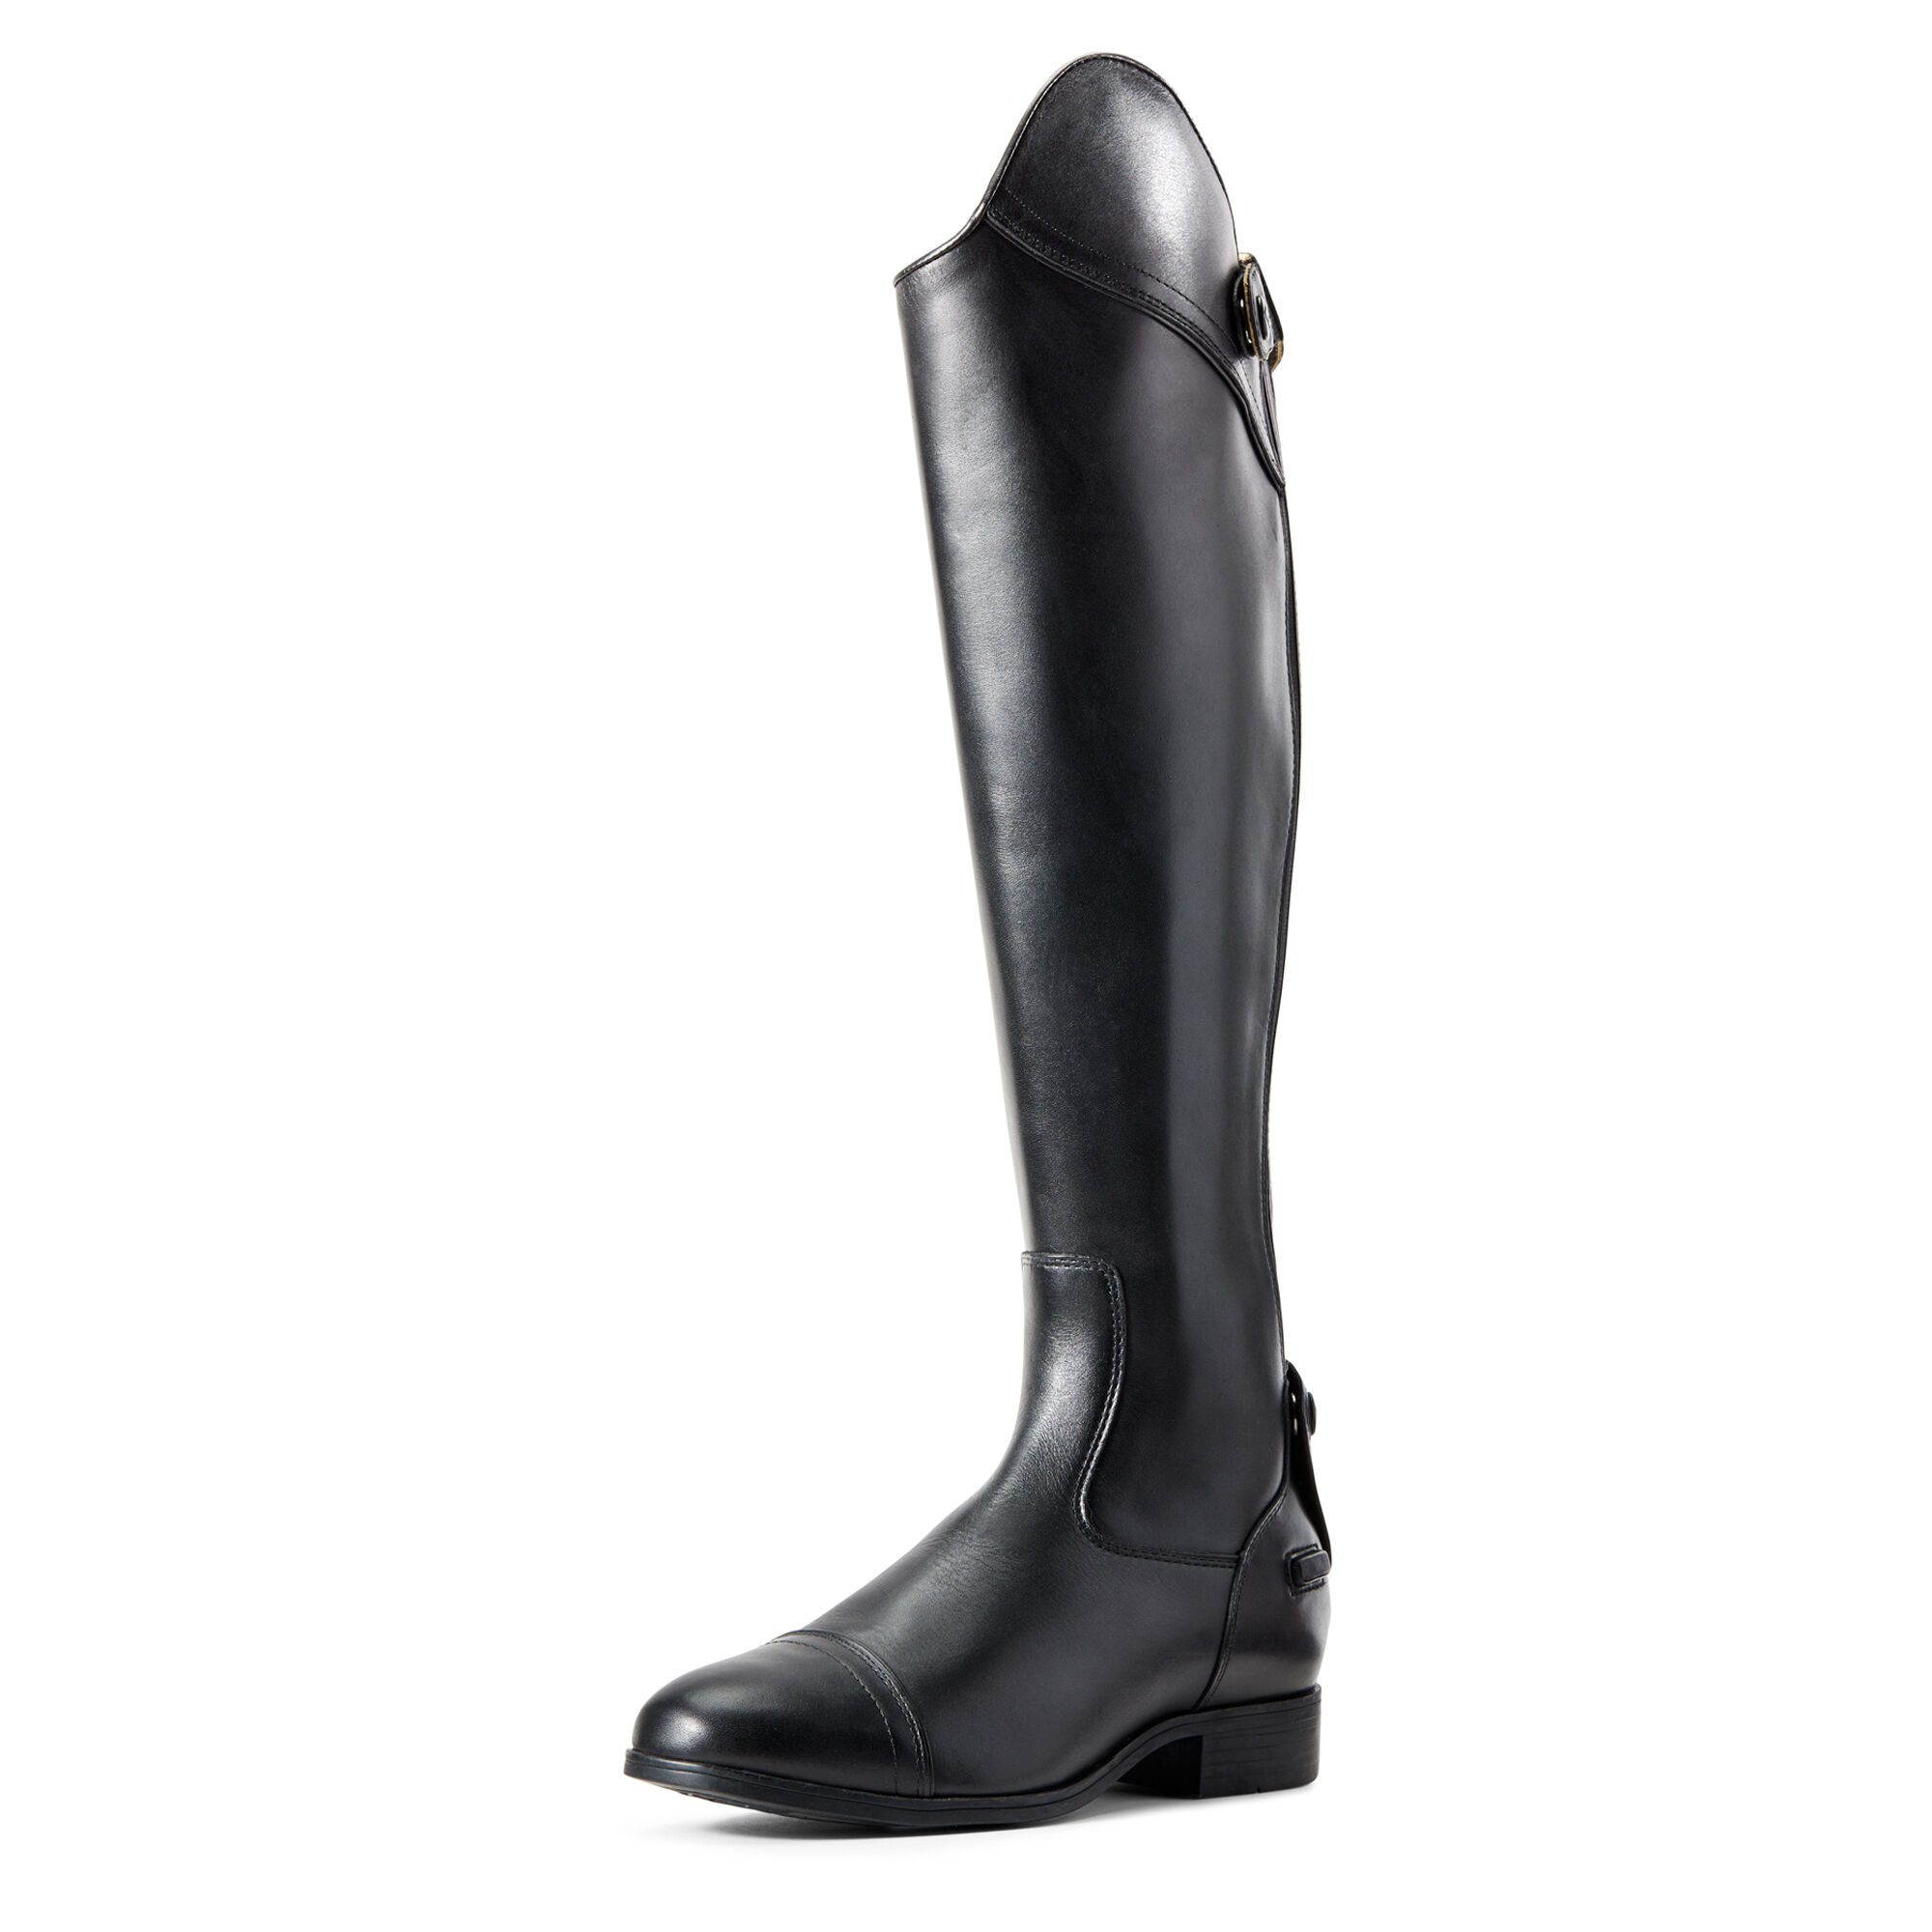 Women's Kinsley Dress Tall Riding Boots in Black Leather  Full Short by Ariat